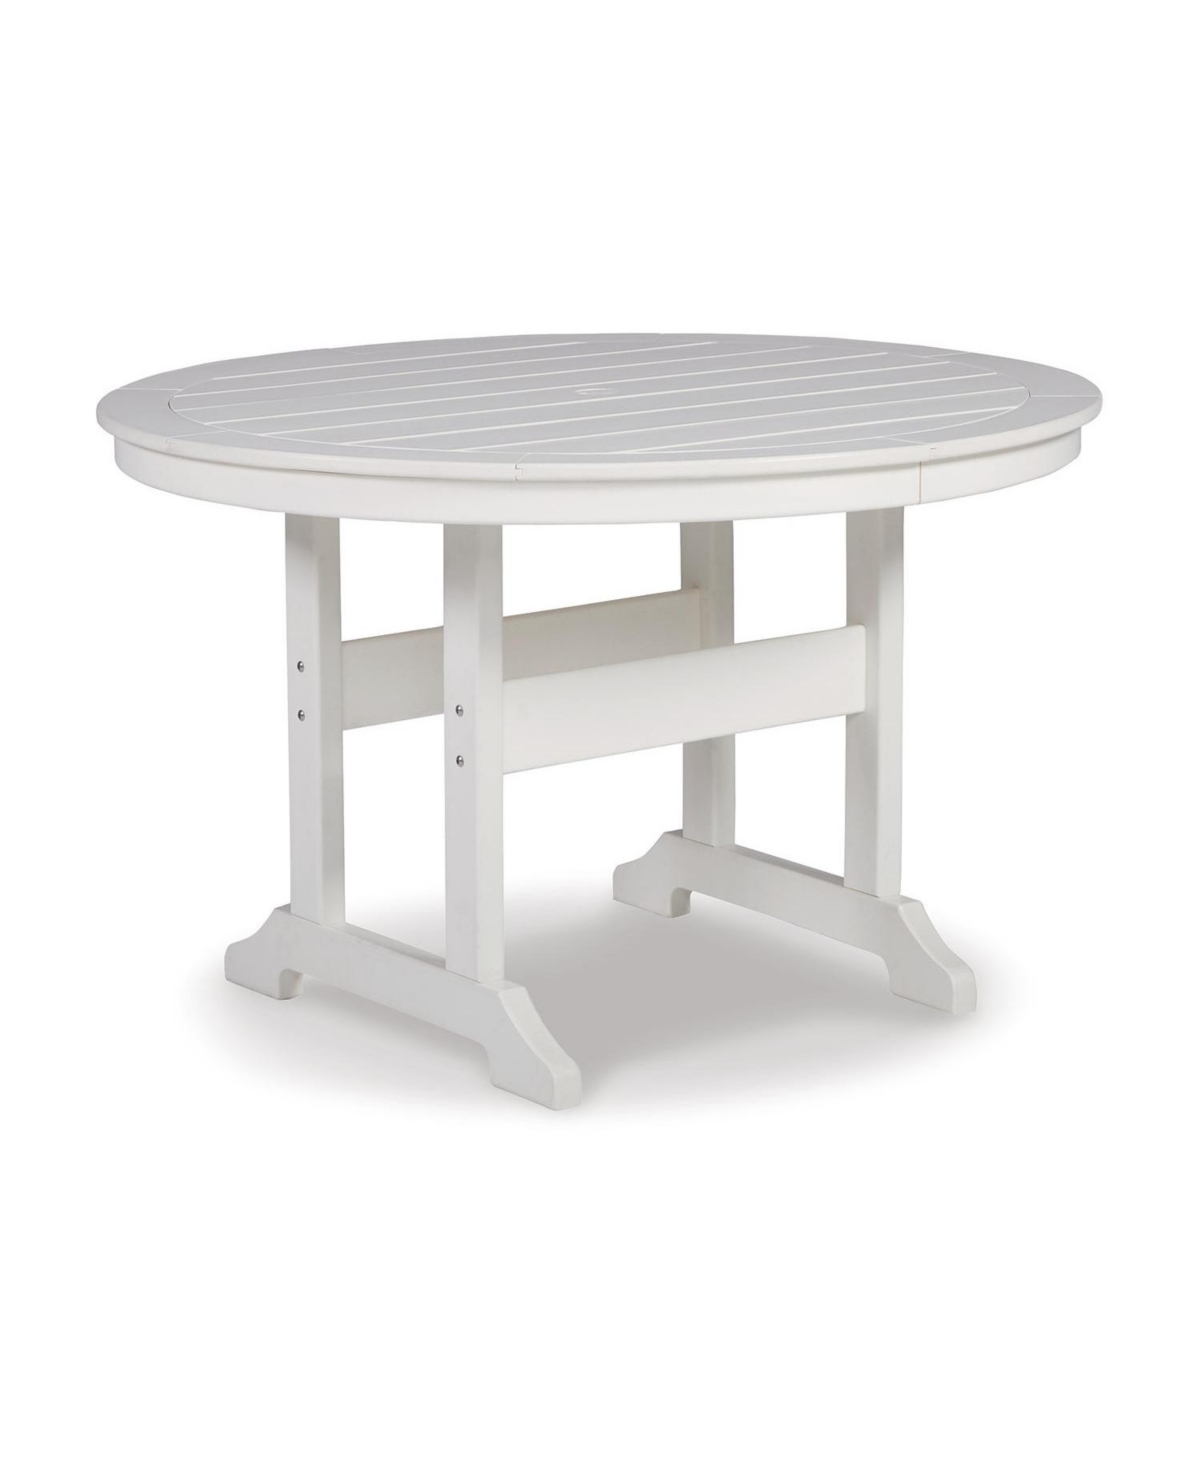 Signature Design By Ashley Crescent Luxe Round Dining Table In White